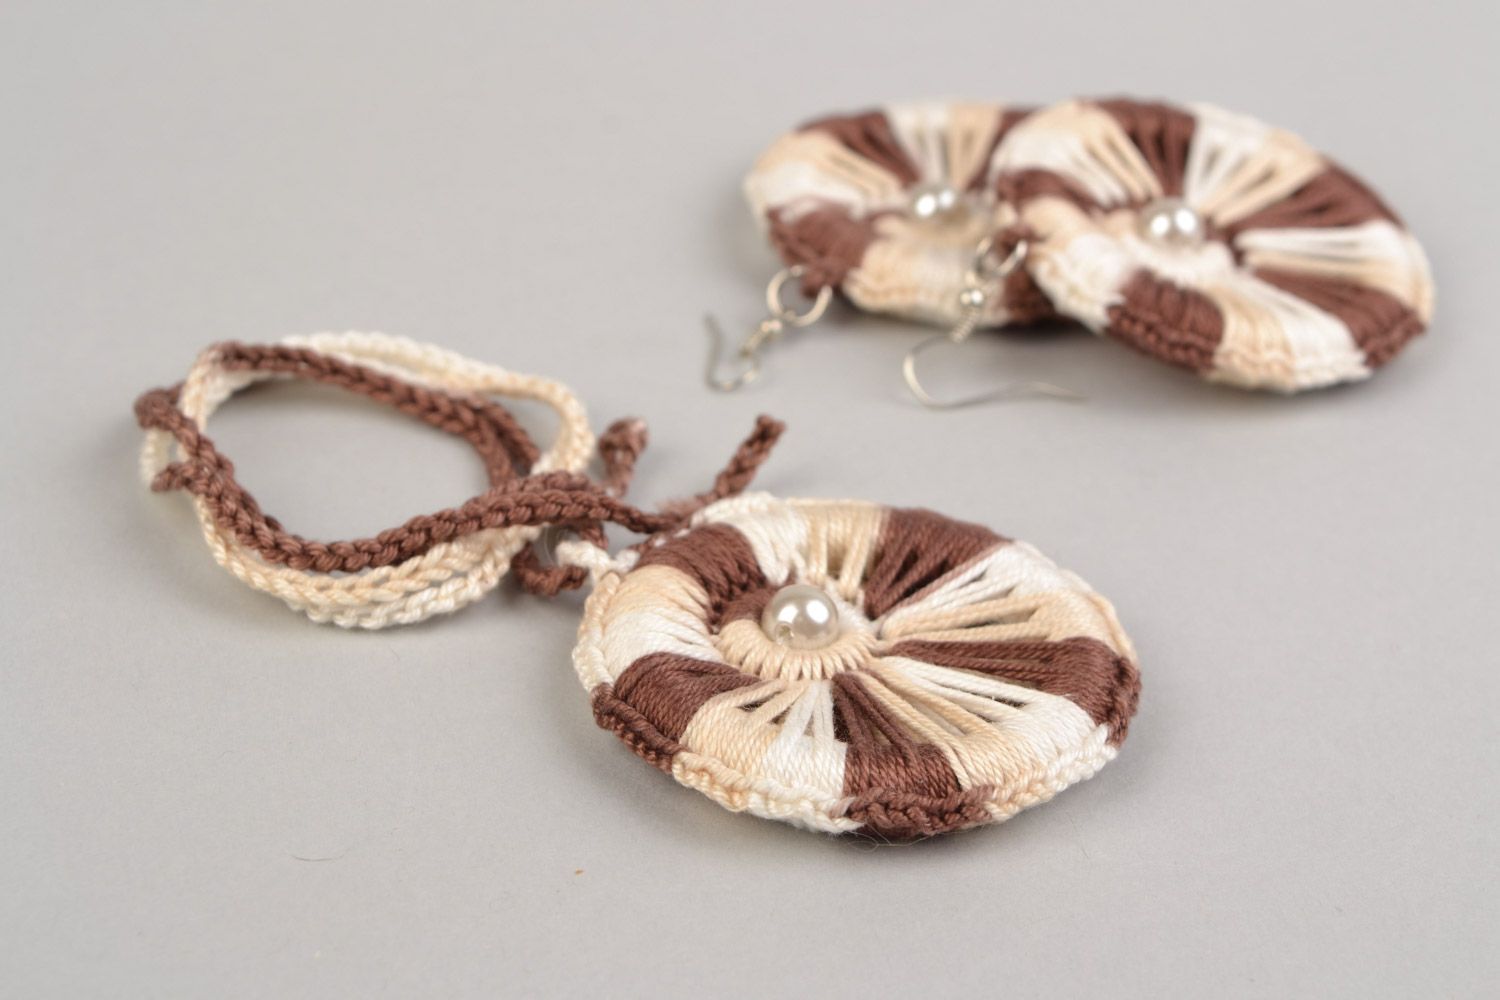 Set of handmade jewelry woven of cotton threads 2 items earrings and pendant photo 4